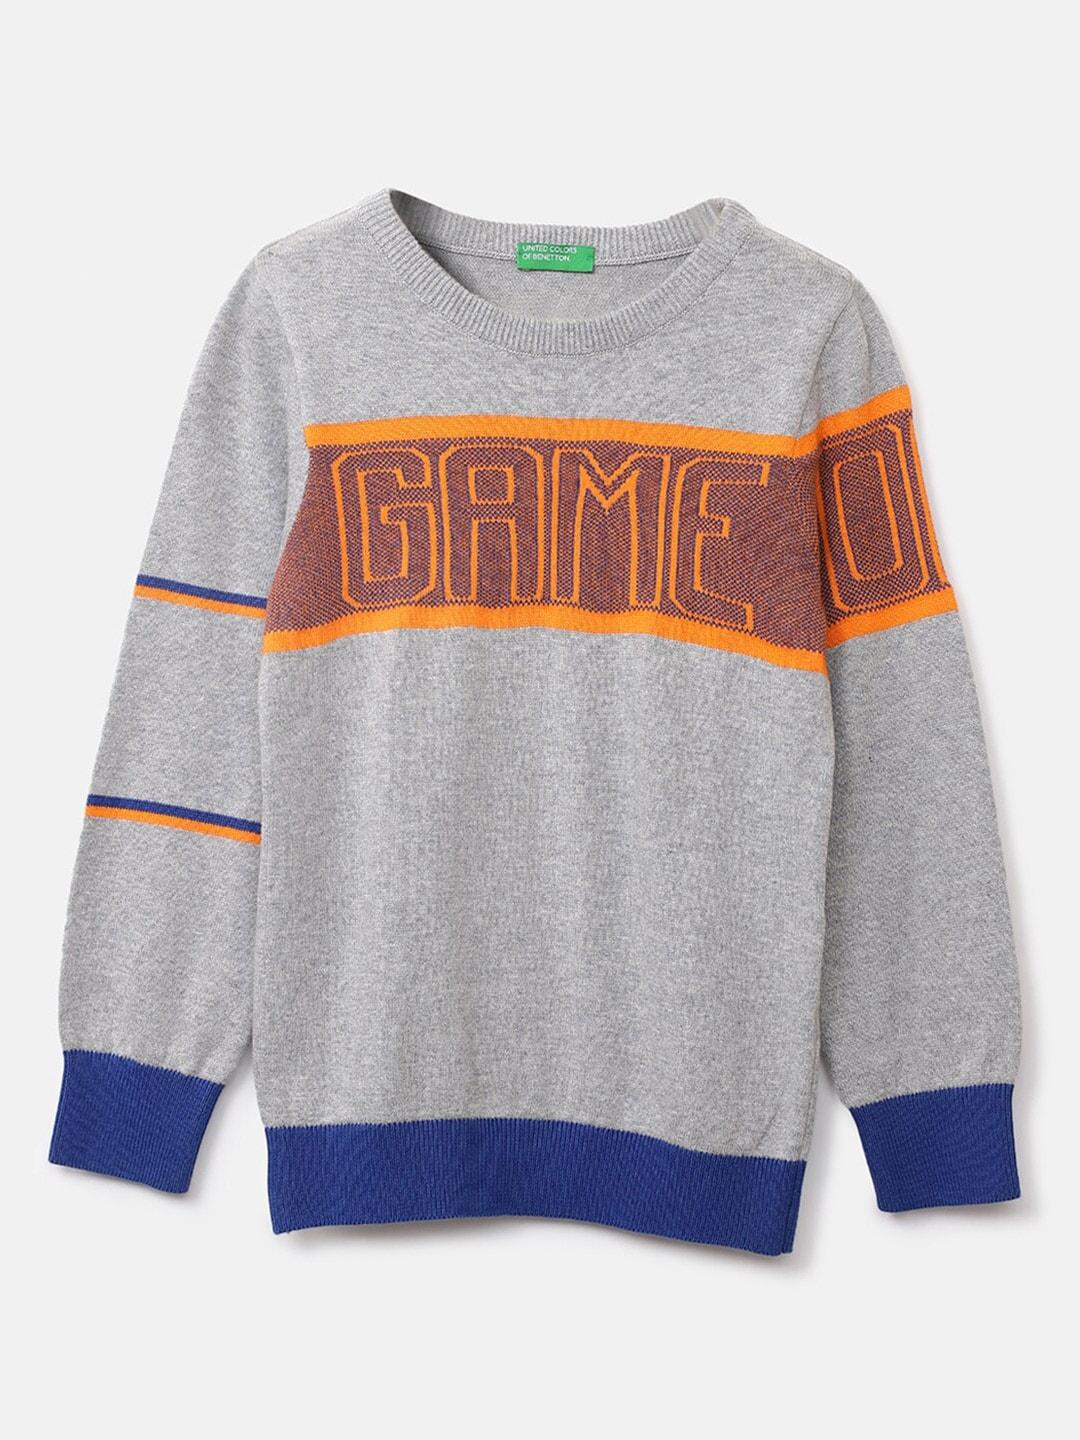 United Colors of Benetton Boys Grey & Orange Typography Printed Pullover